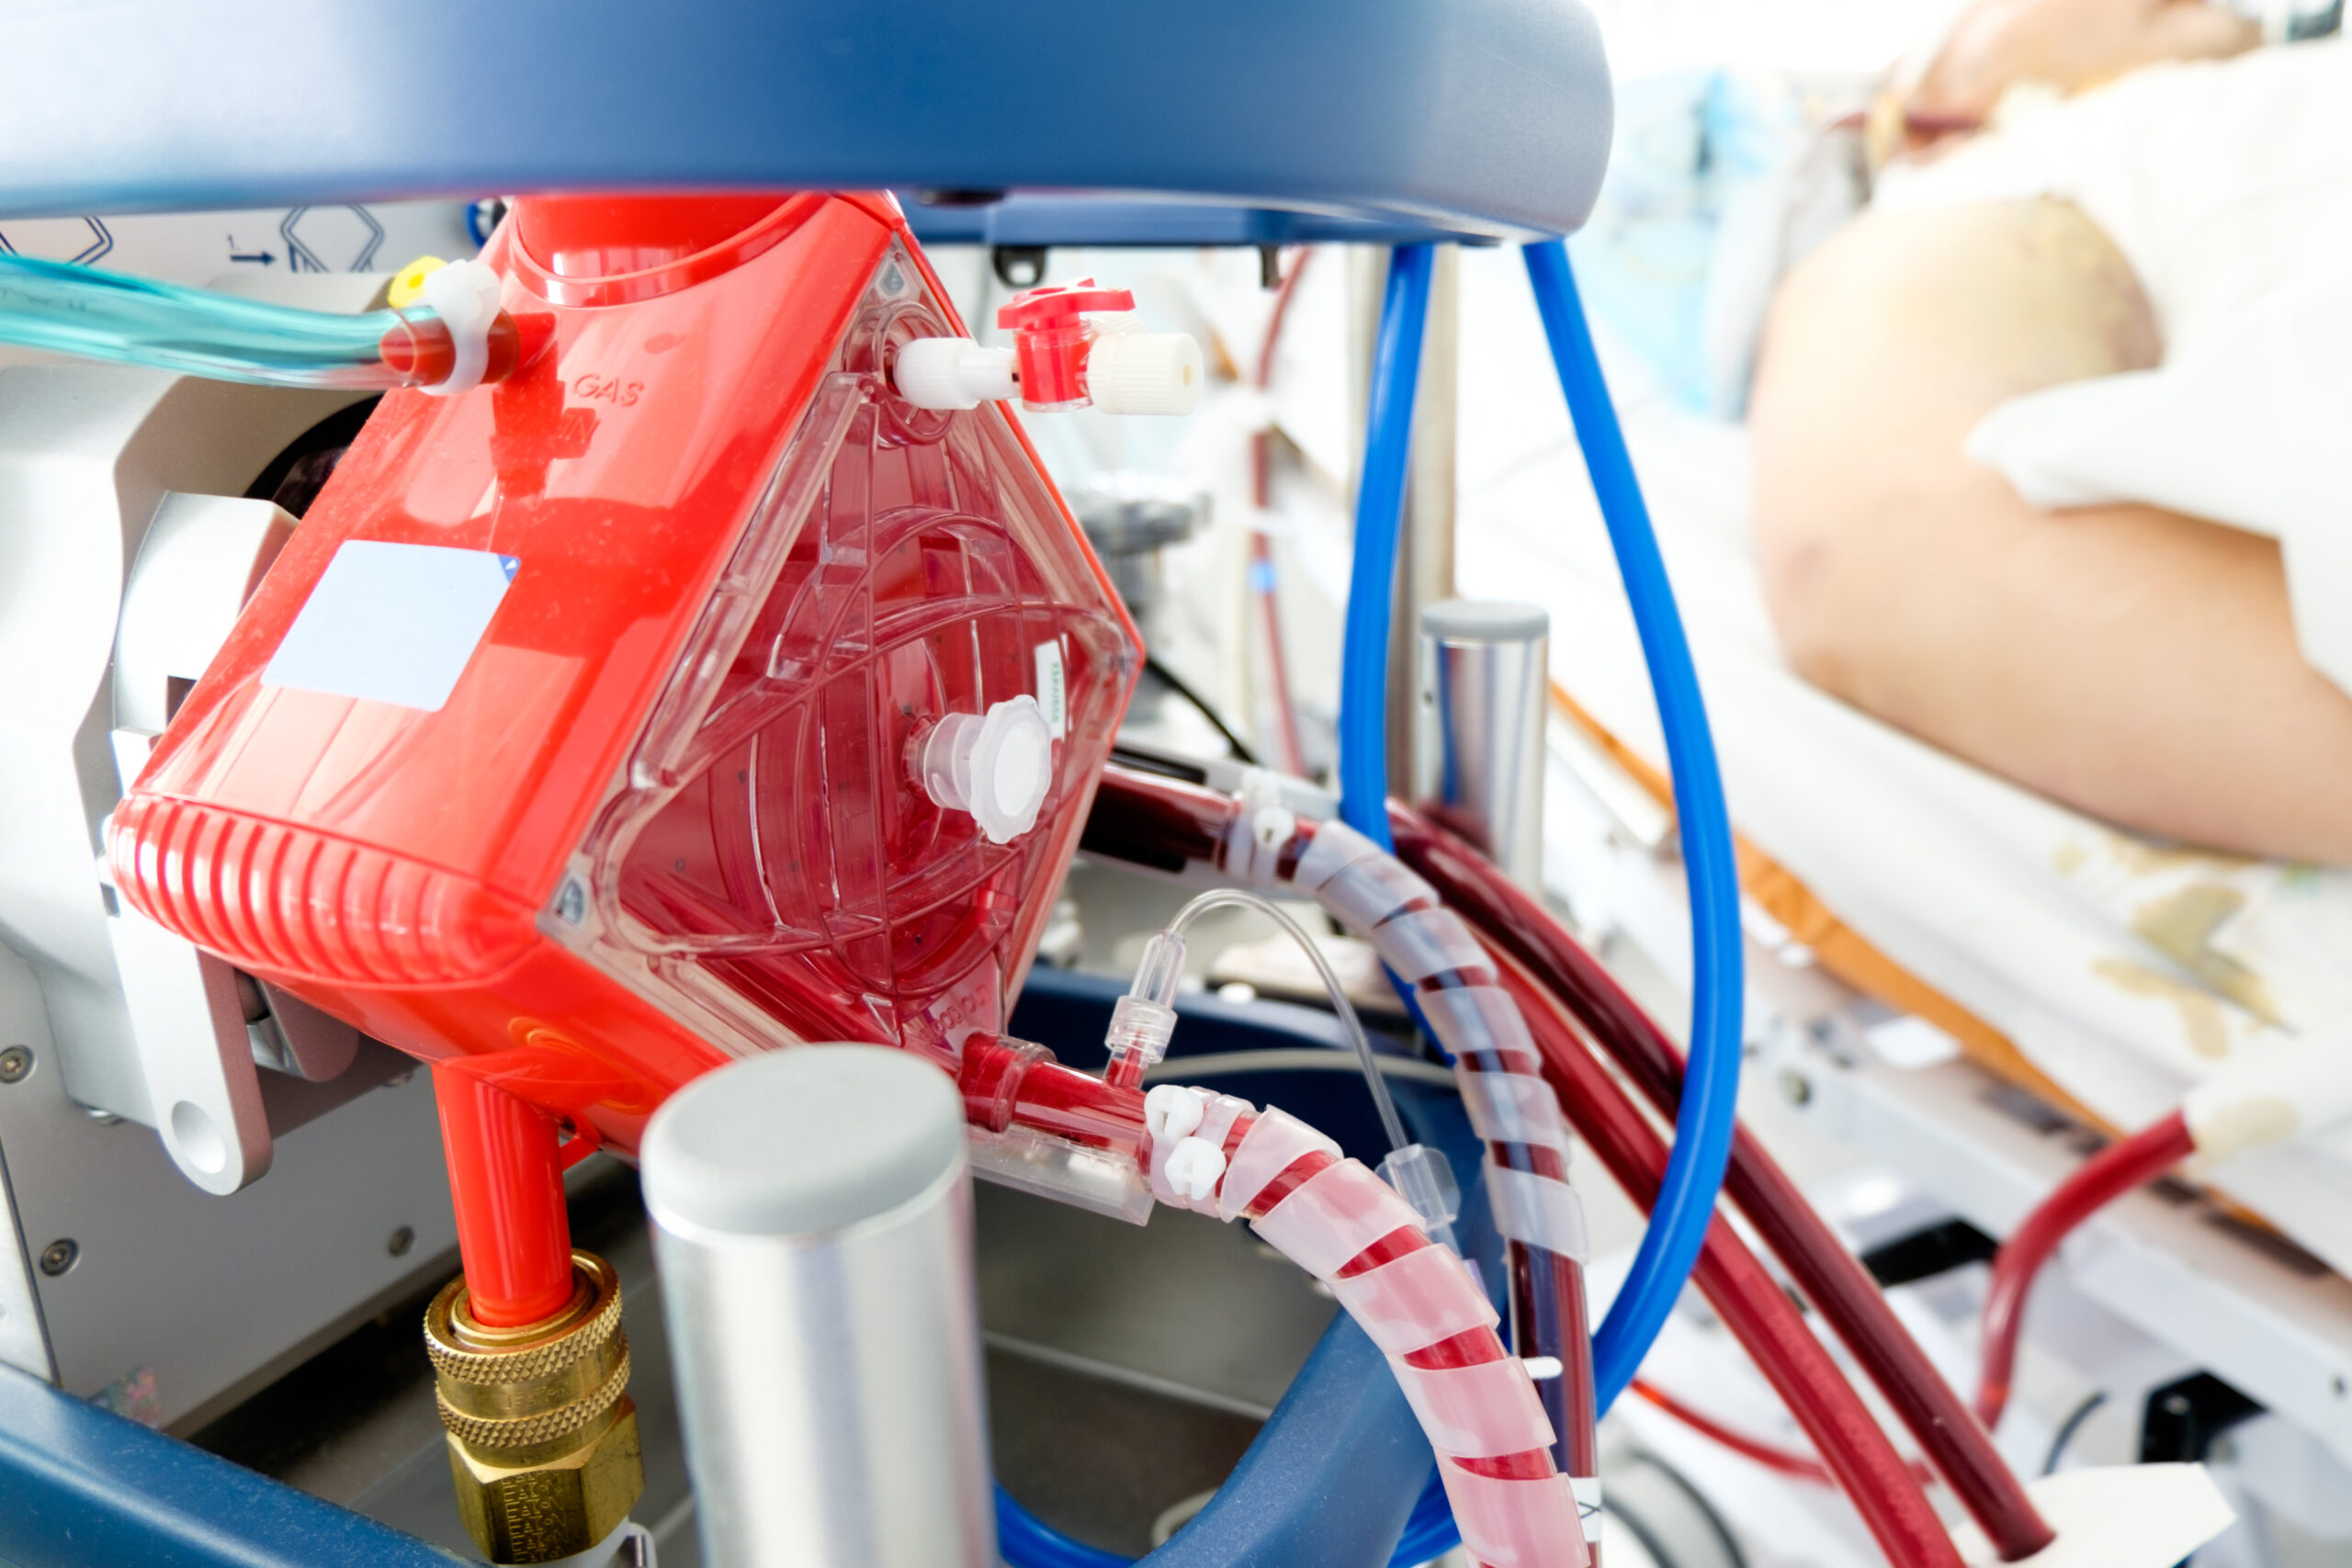 Pros and Cons of Extracorporeal Cardiopulmonary Resuscitation (ECPR)